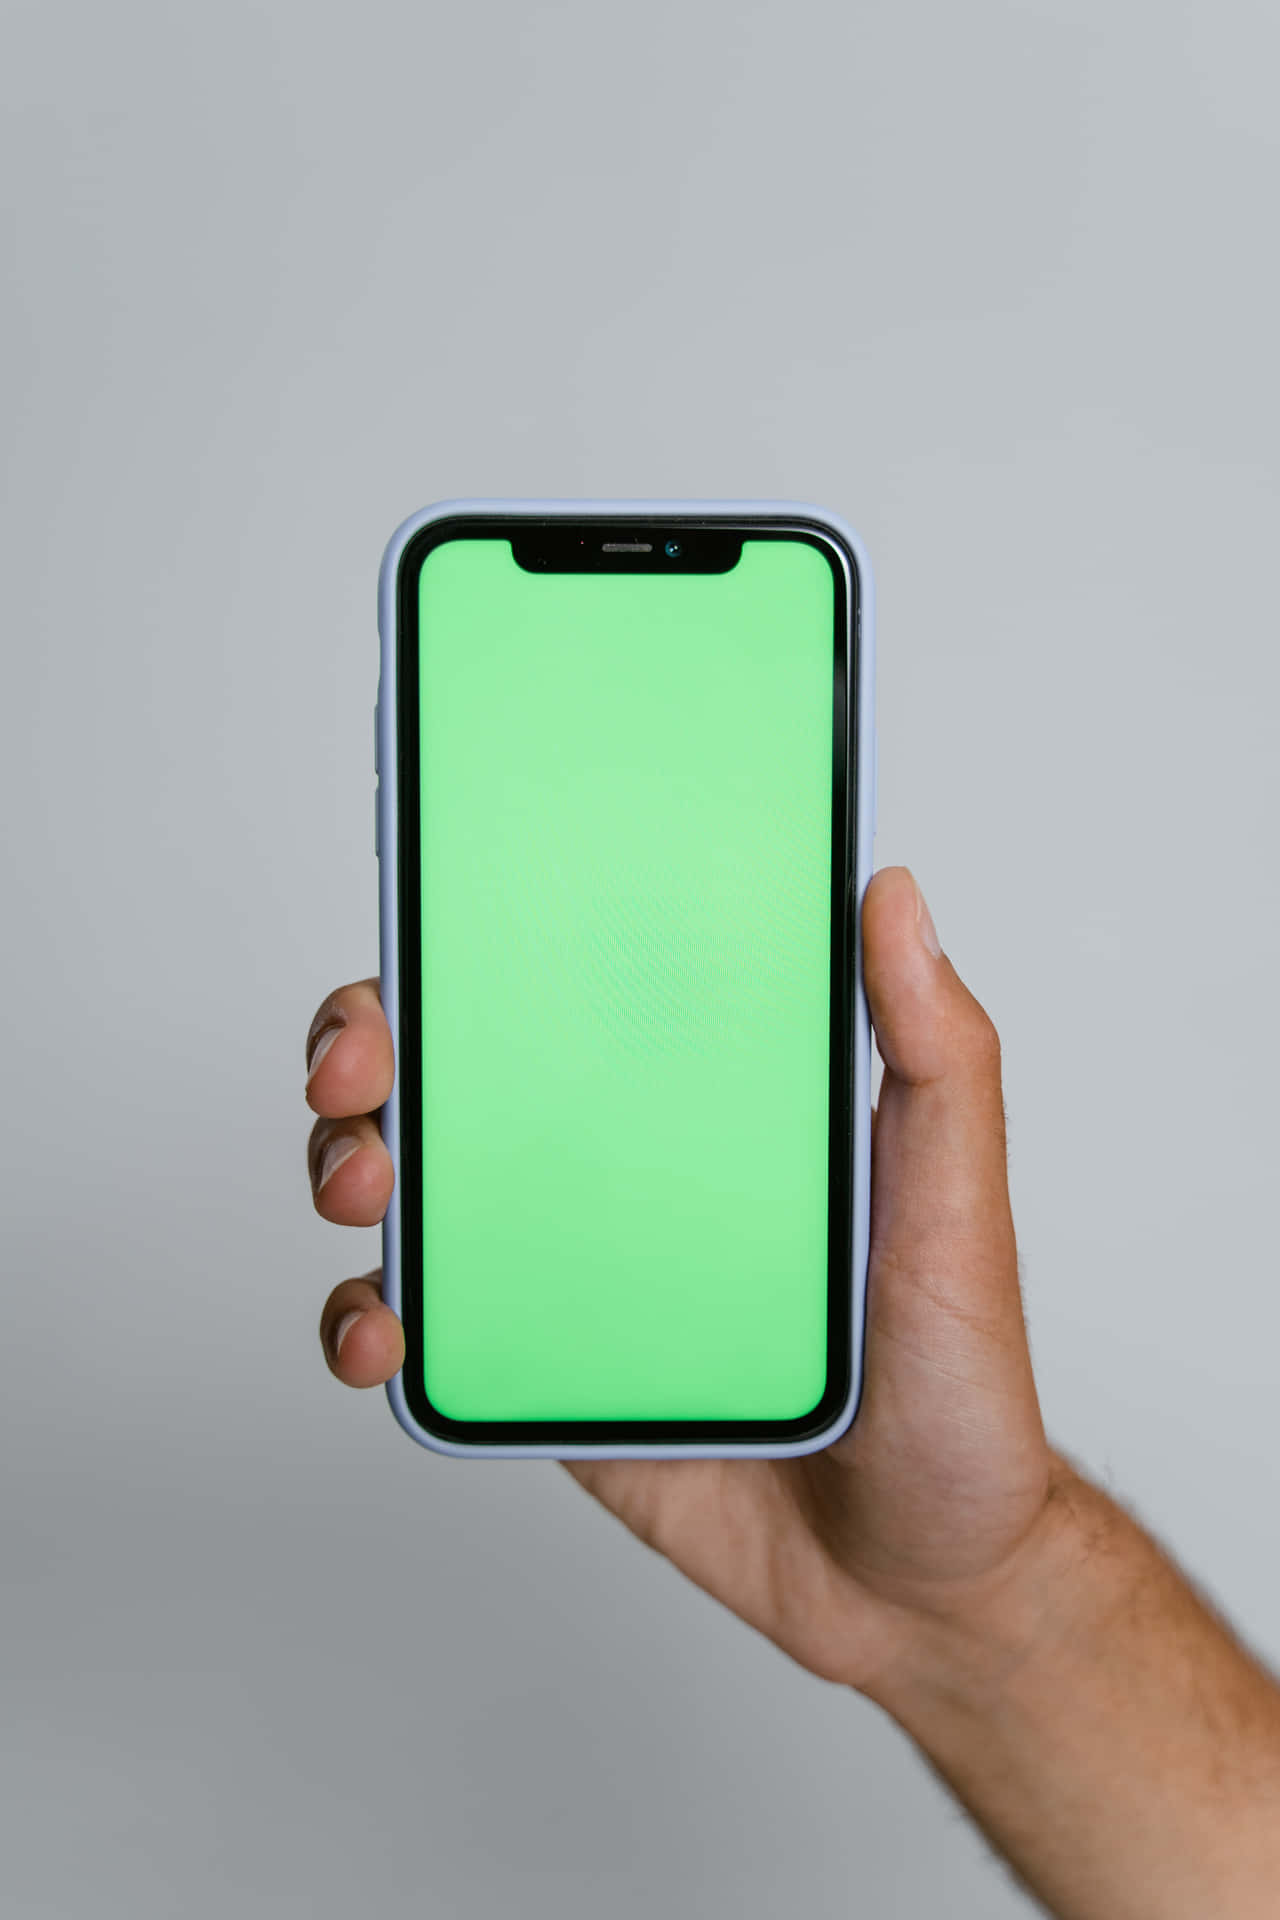 A Man Holding An Iphone X With A Green Screen